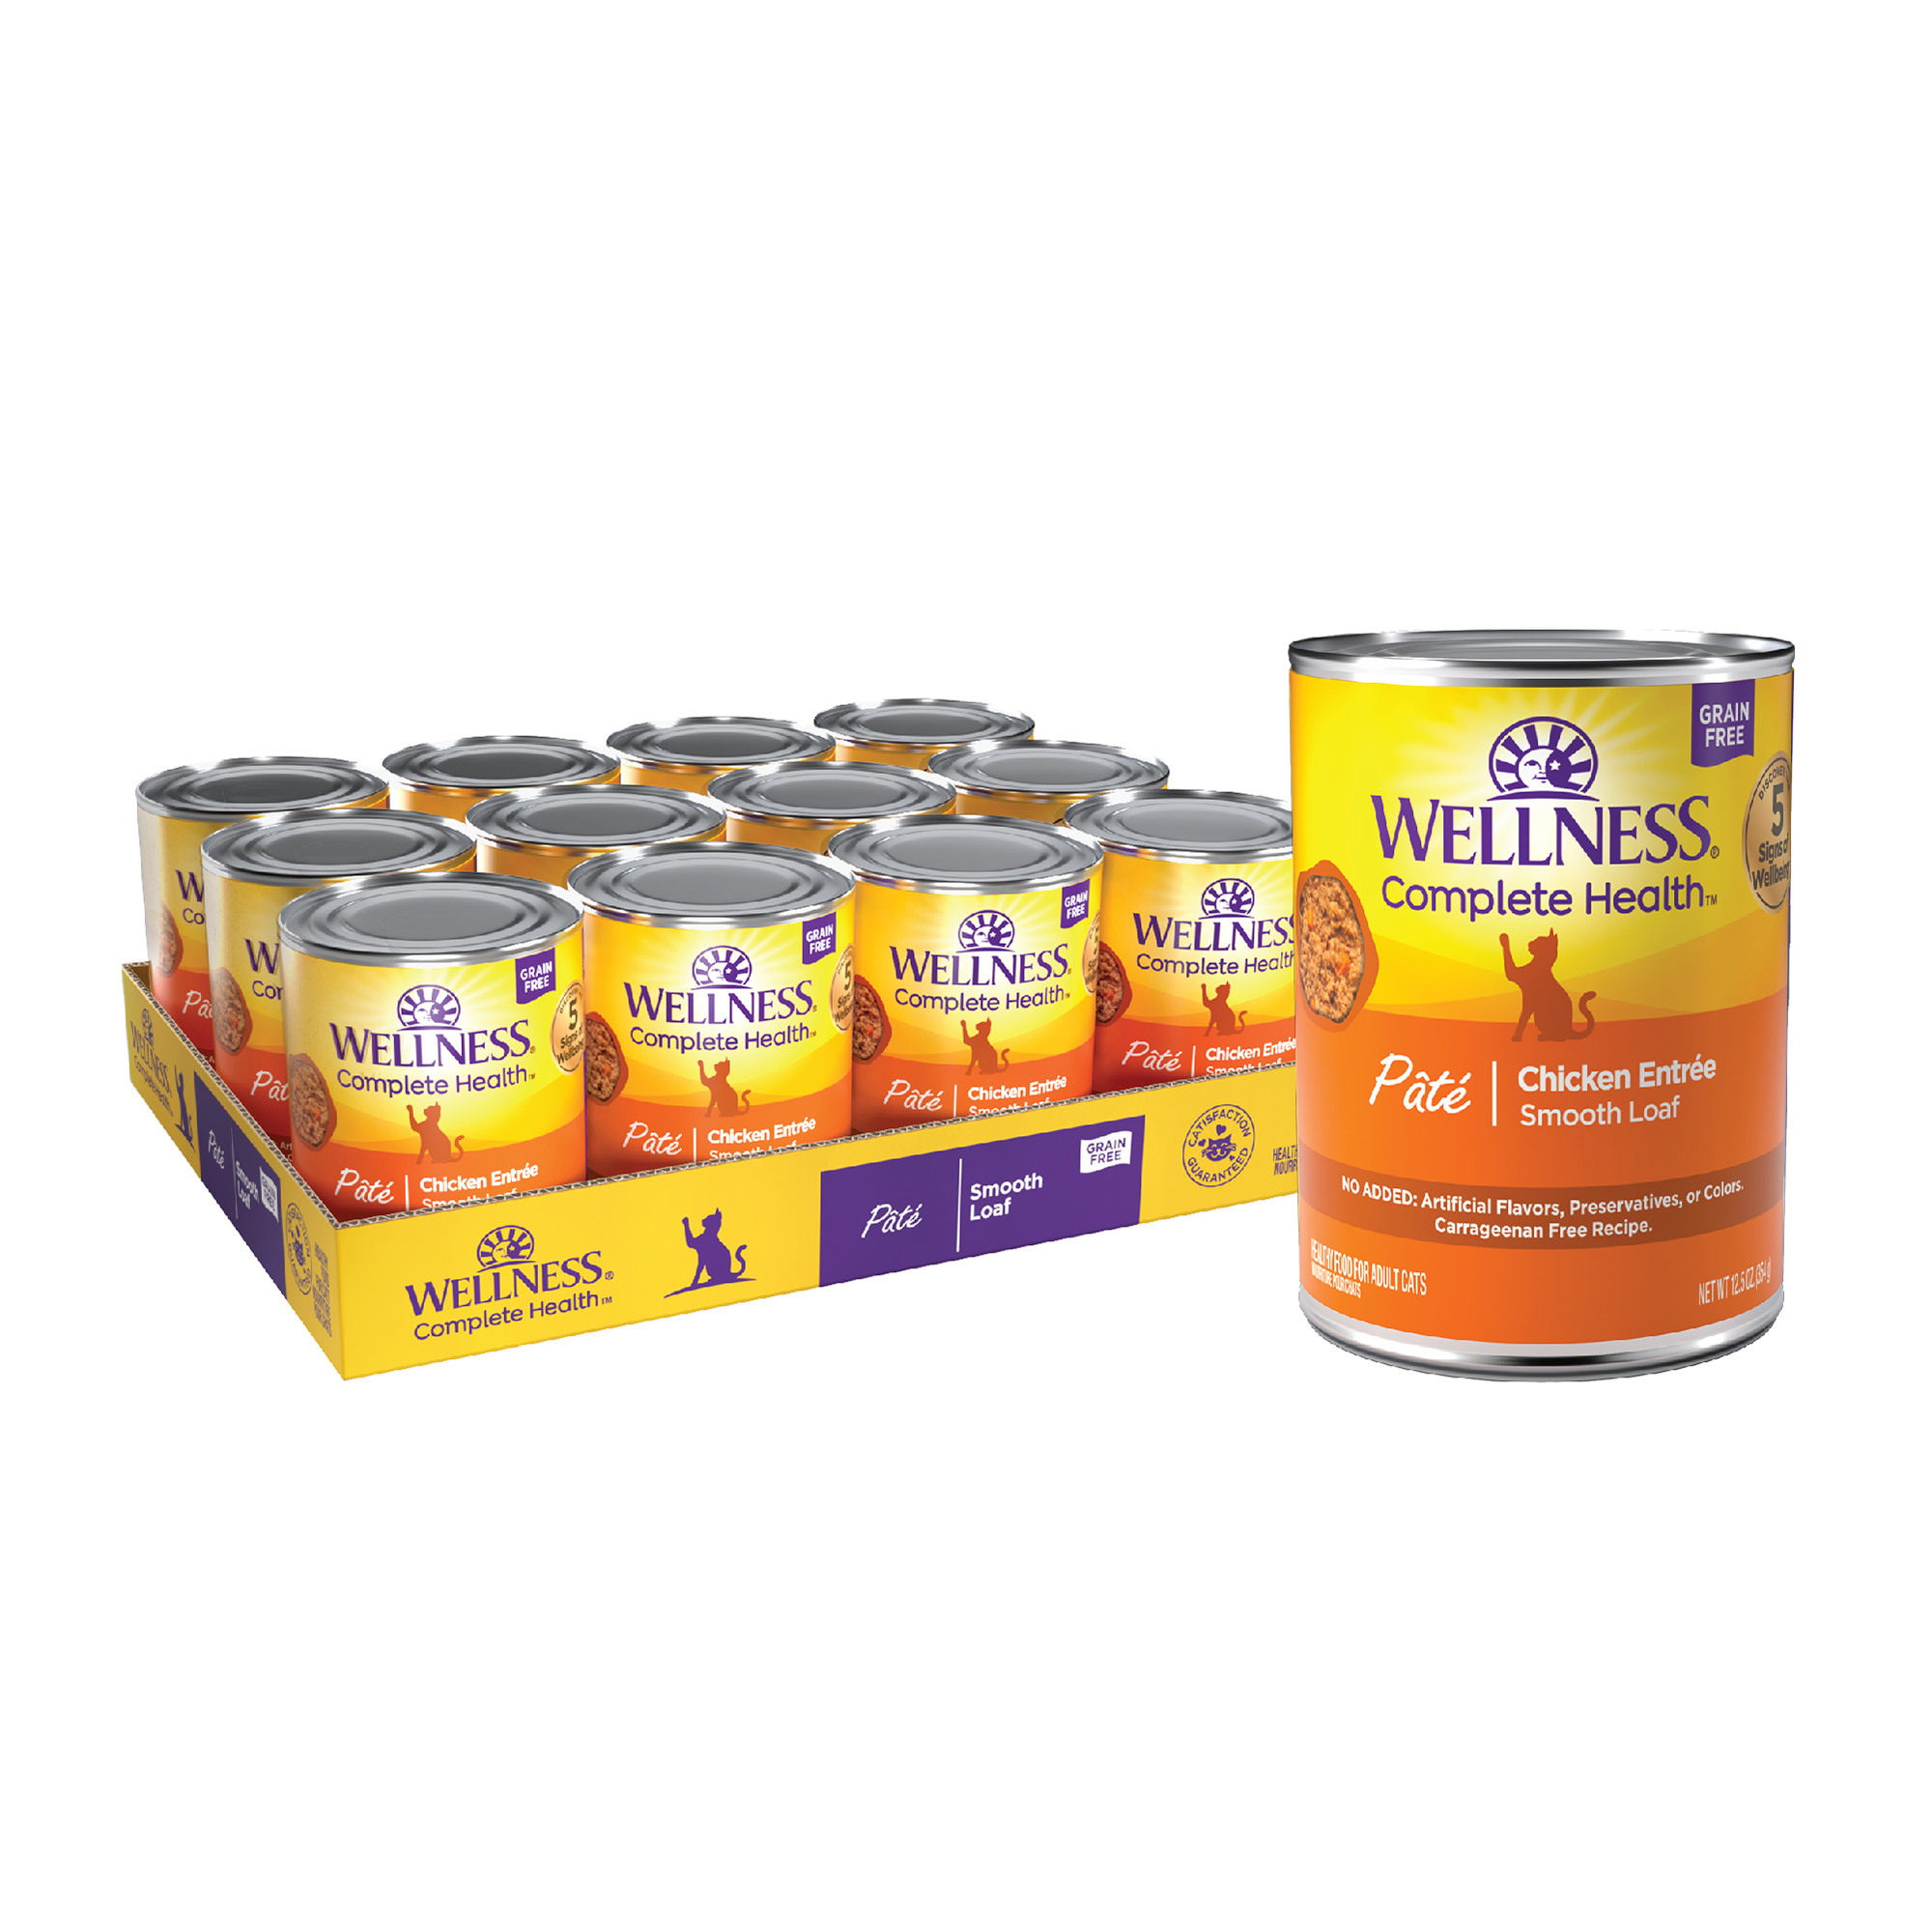 Wellness Complete Health Grain Free Canned Cat Food, Chicken Pate, 12.5 Ounces (Pack of 12) - image 1 of 9